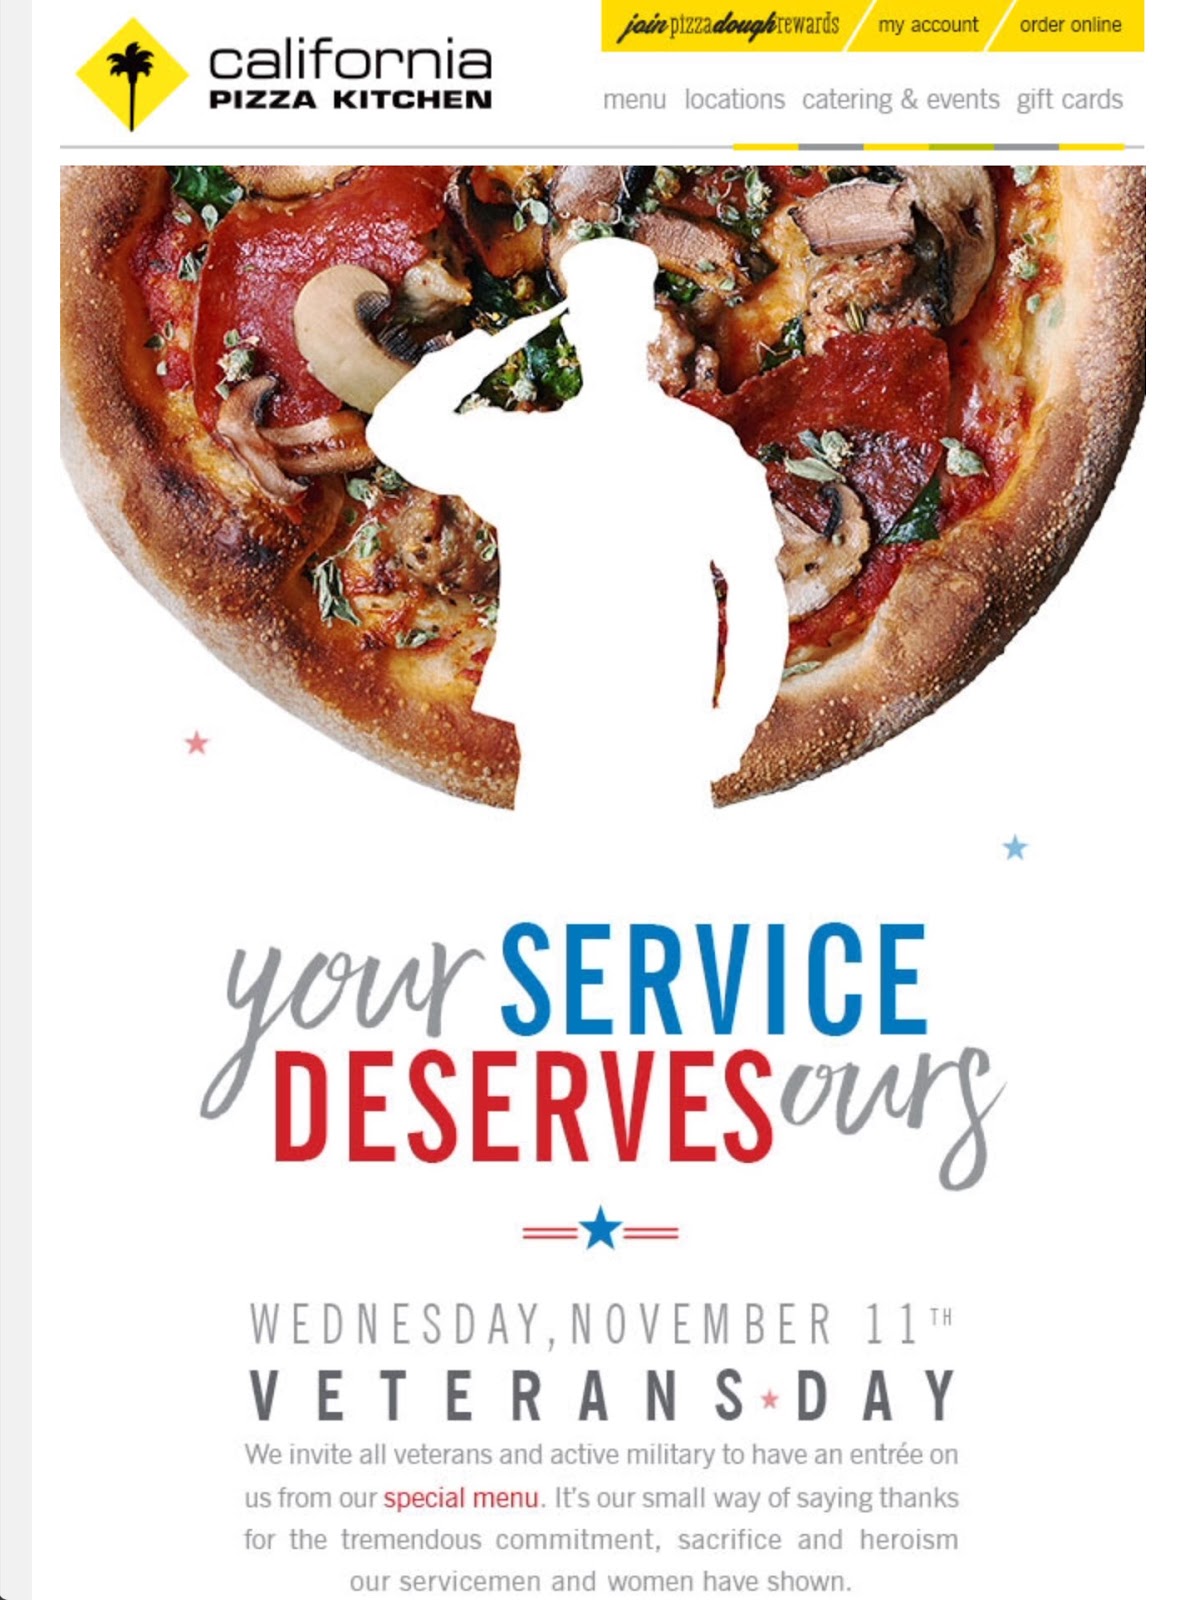 FREE IS MY LIFE California Pizza Kitchen honors Veterans and Active